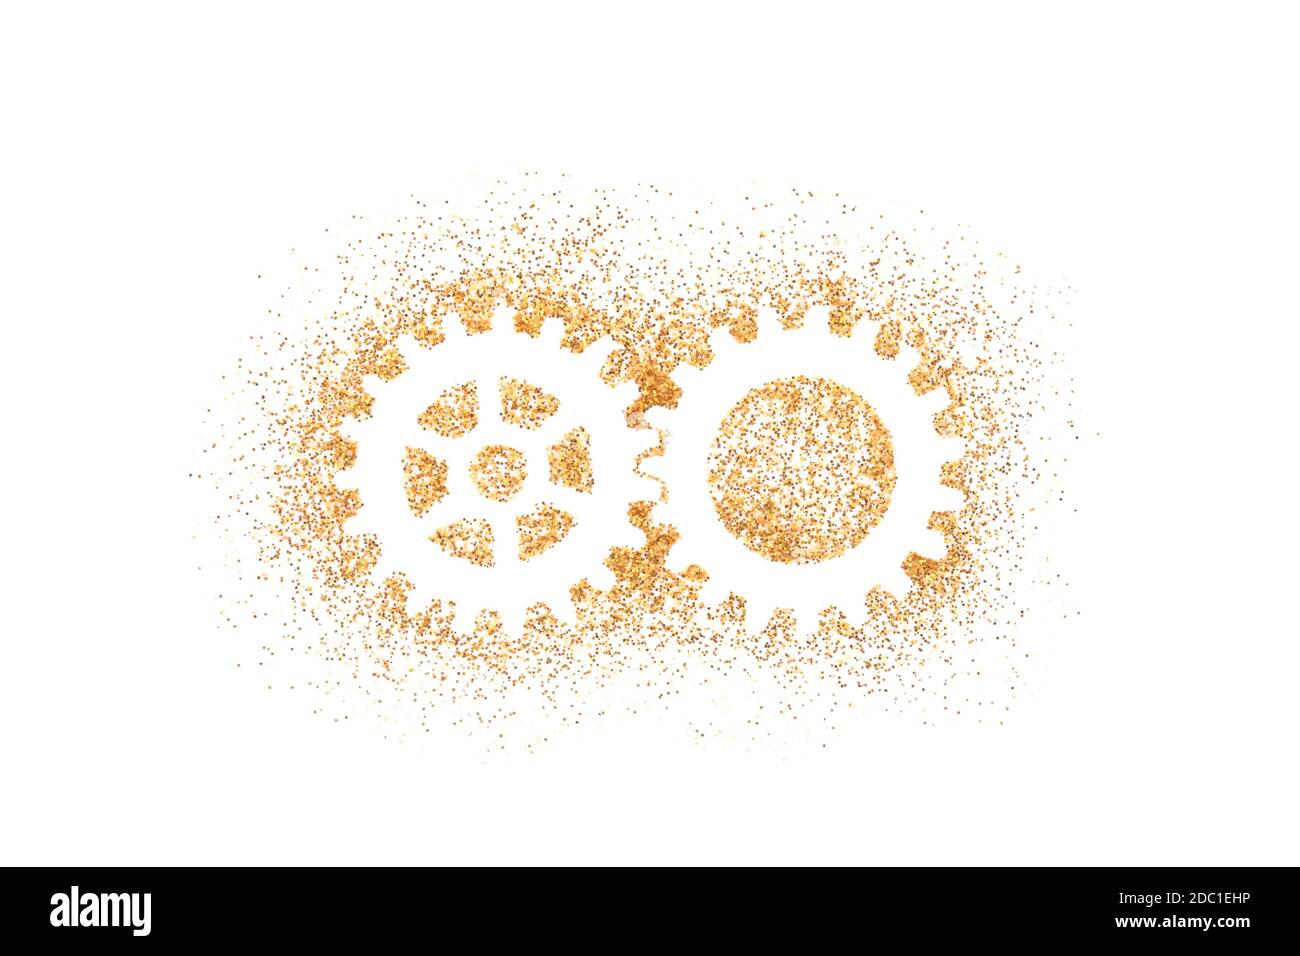 Two gears shape on golden glitter isolated on white background Stock Photo